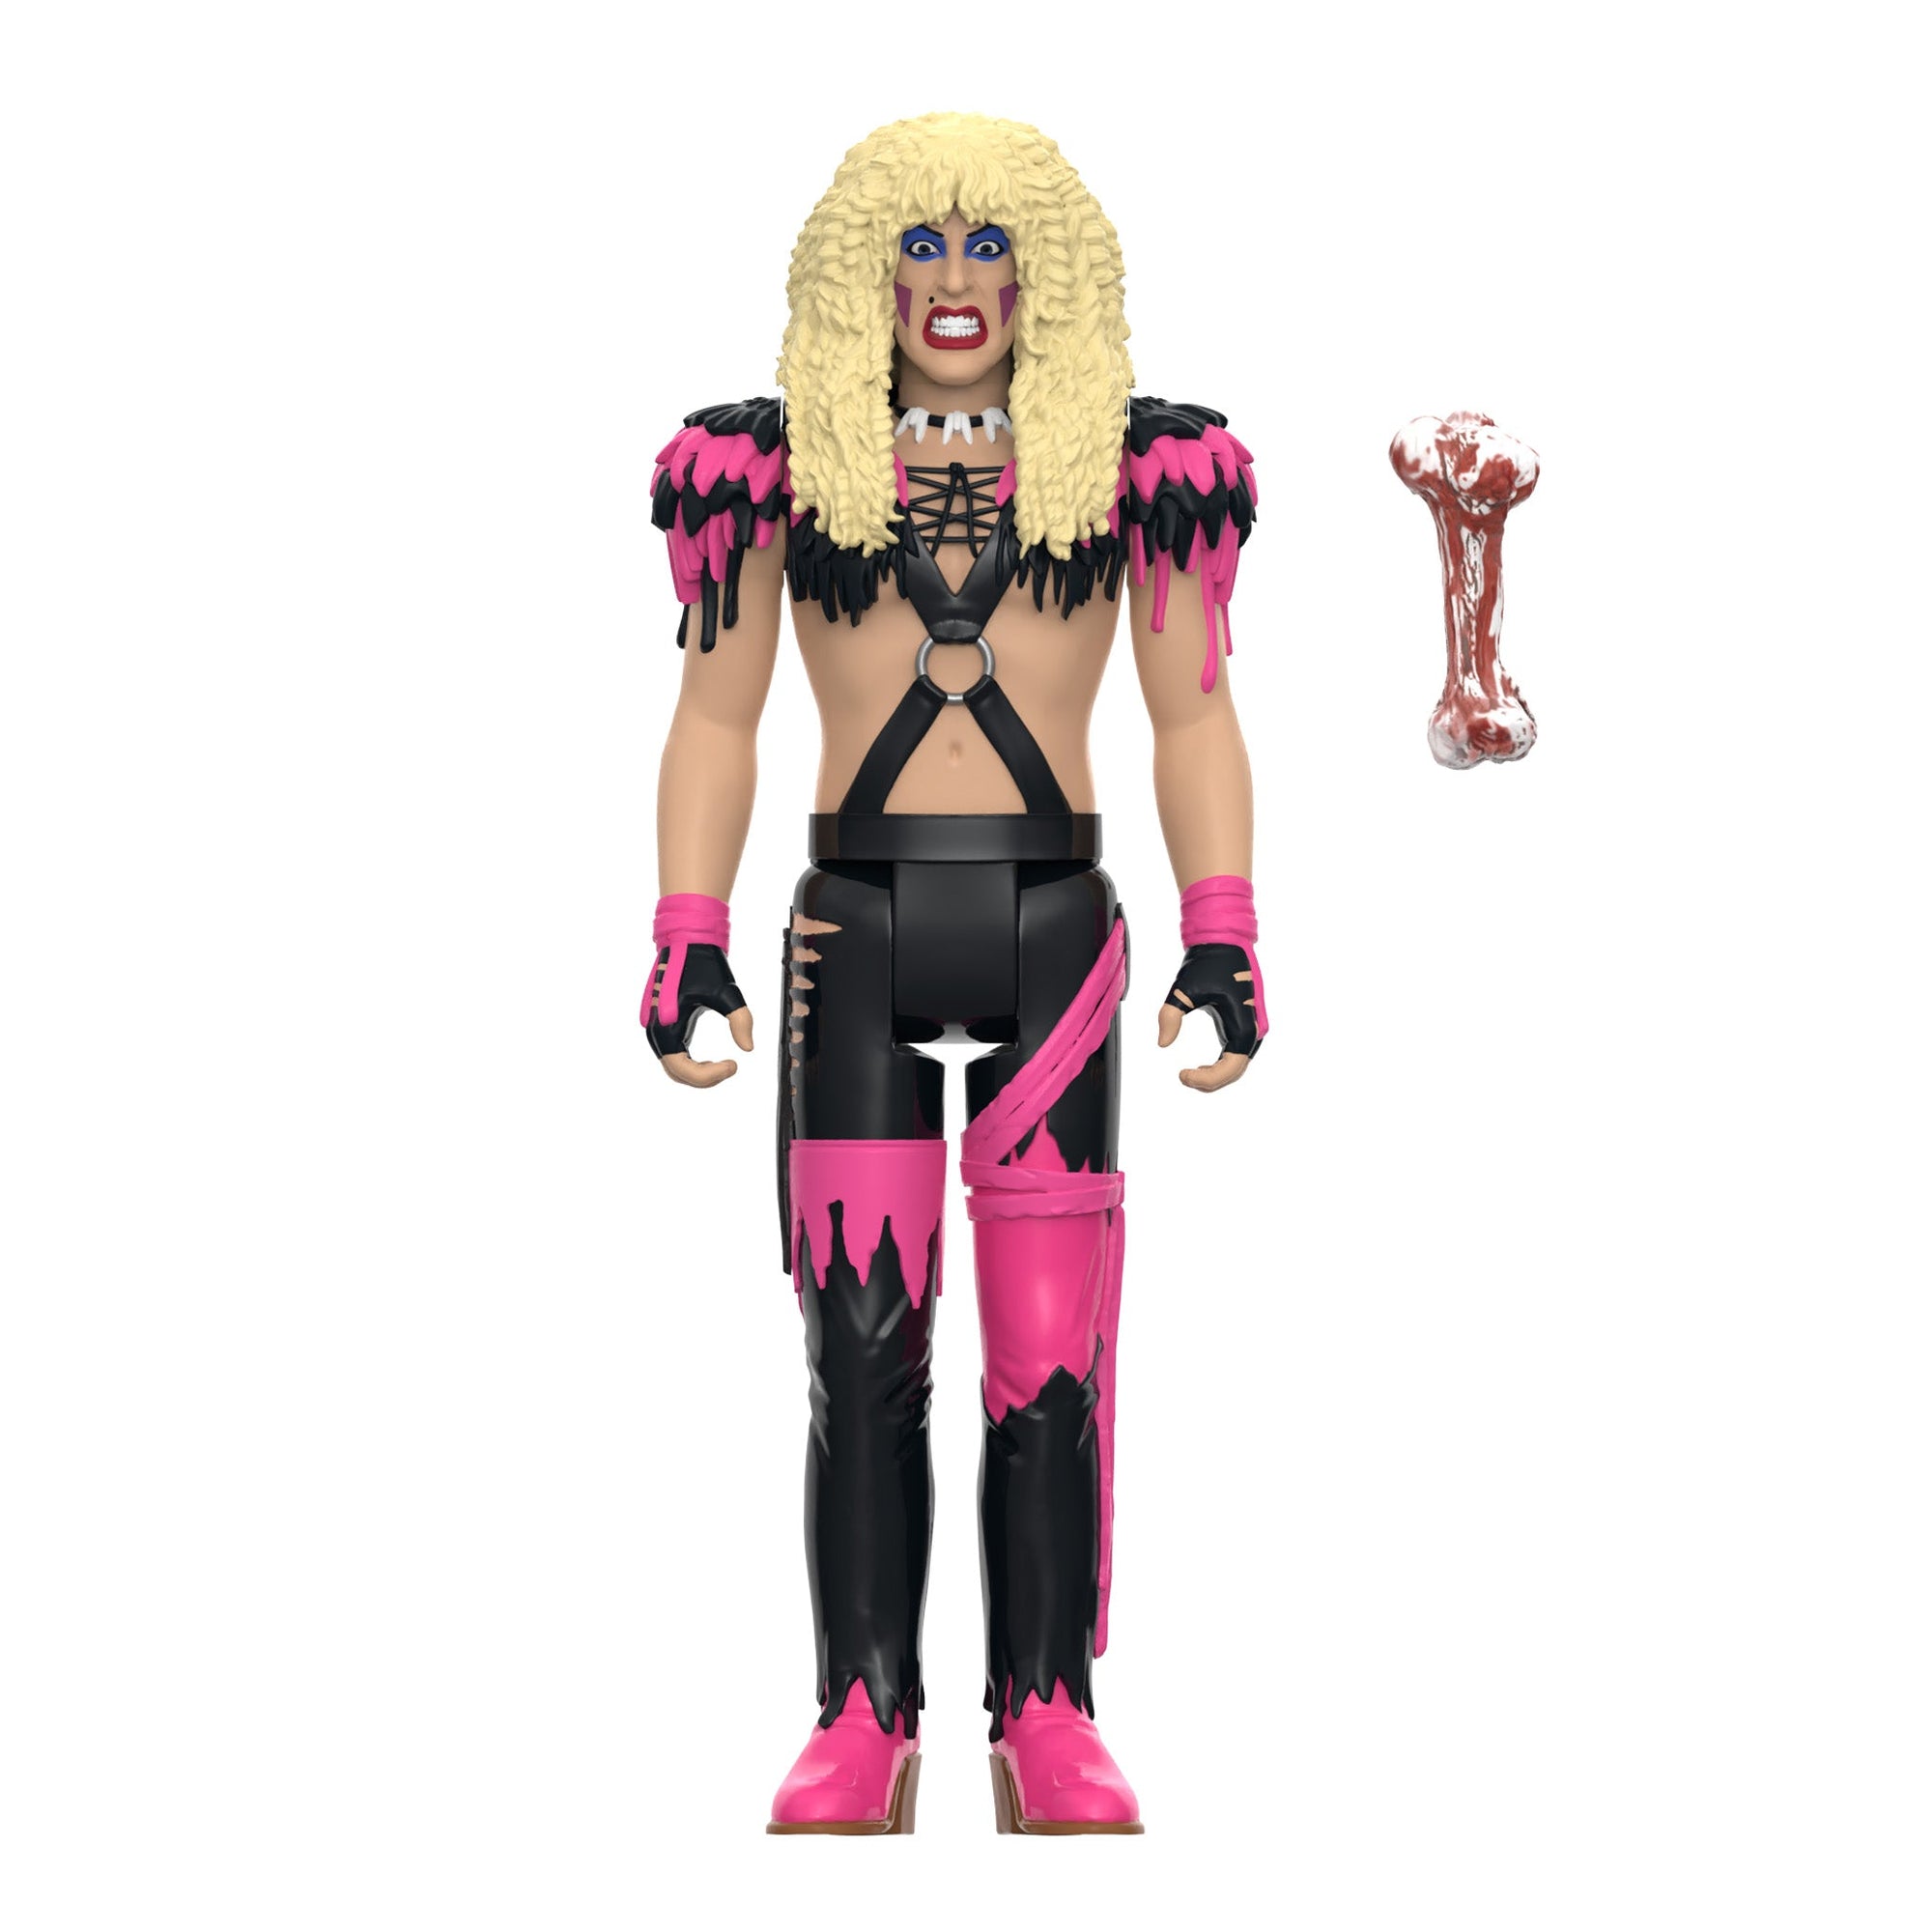 Dee Snider Twisted Sister W1 ReAction Figure - Twisted Sister by Super7 *PUNCHED